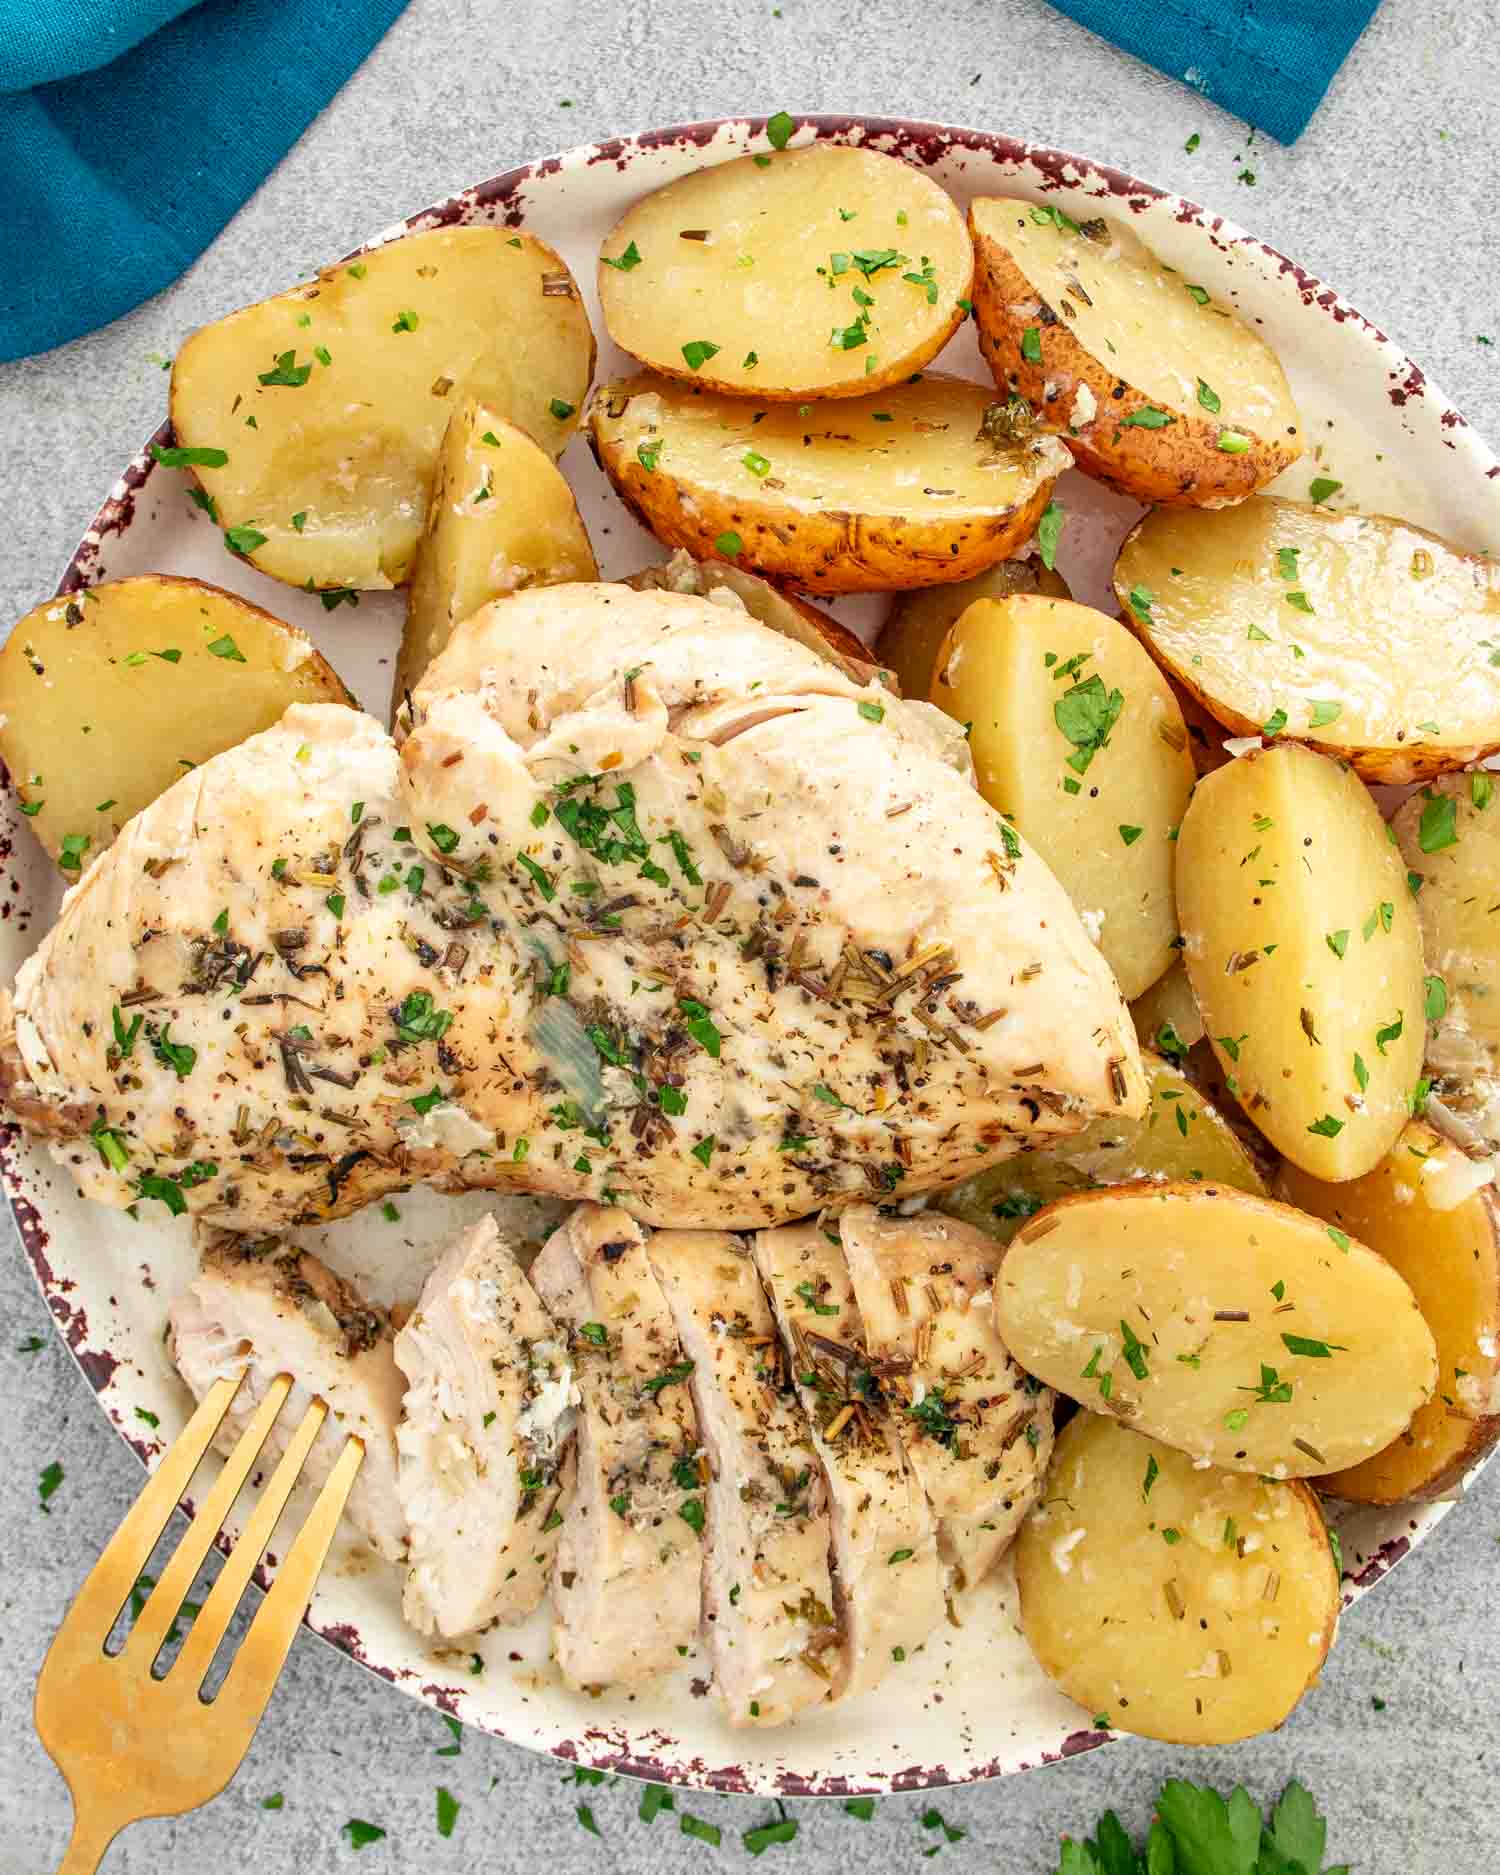 sliced up chicken breast and potatoes made in a crockpot, on a white plate.